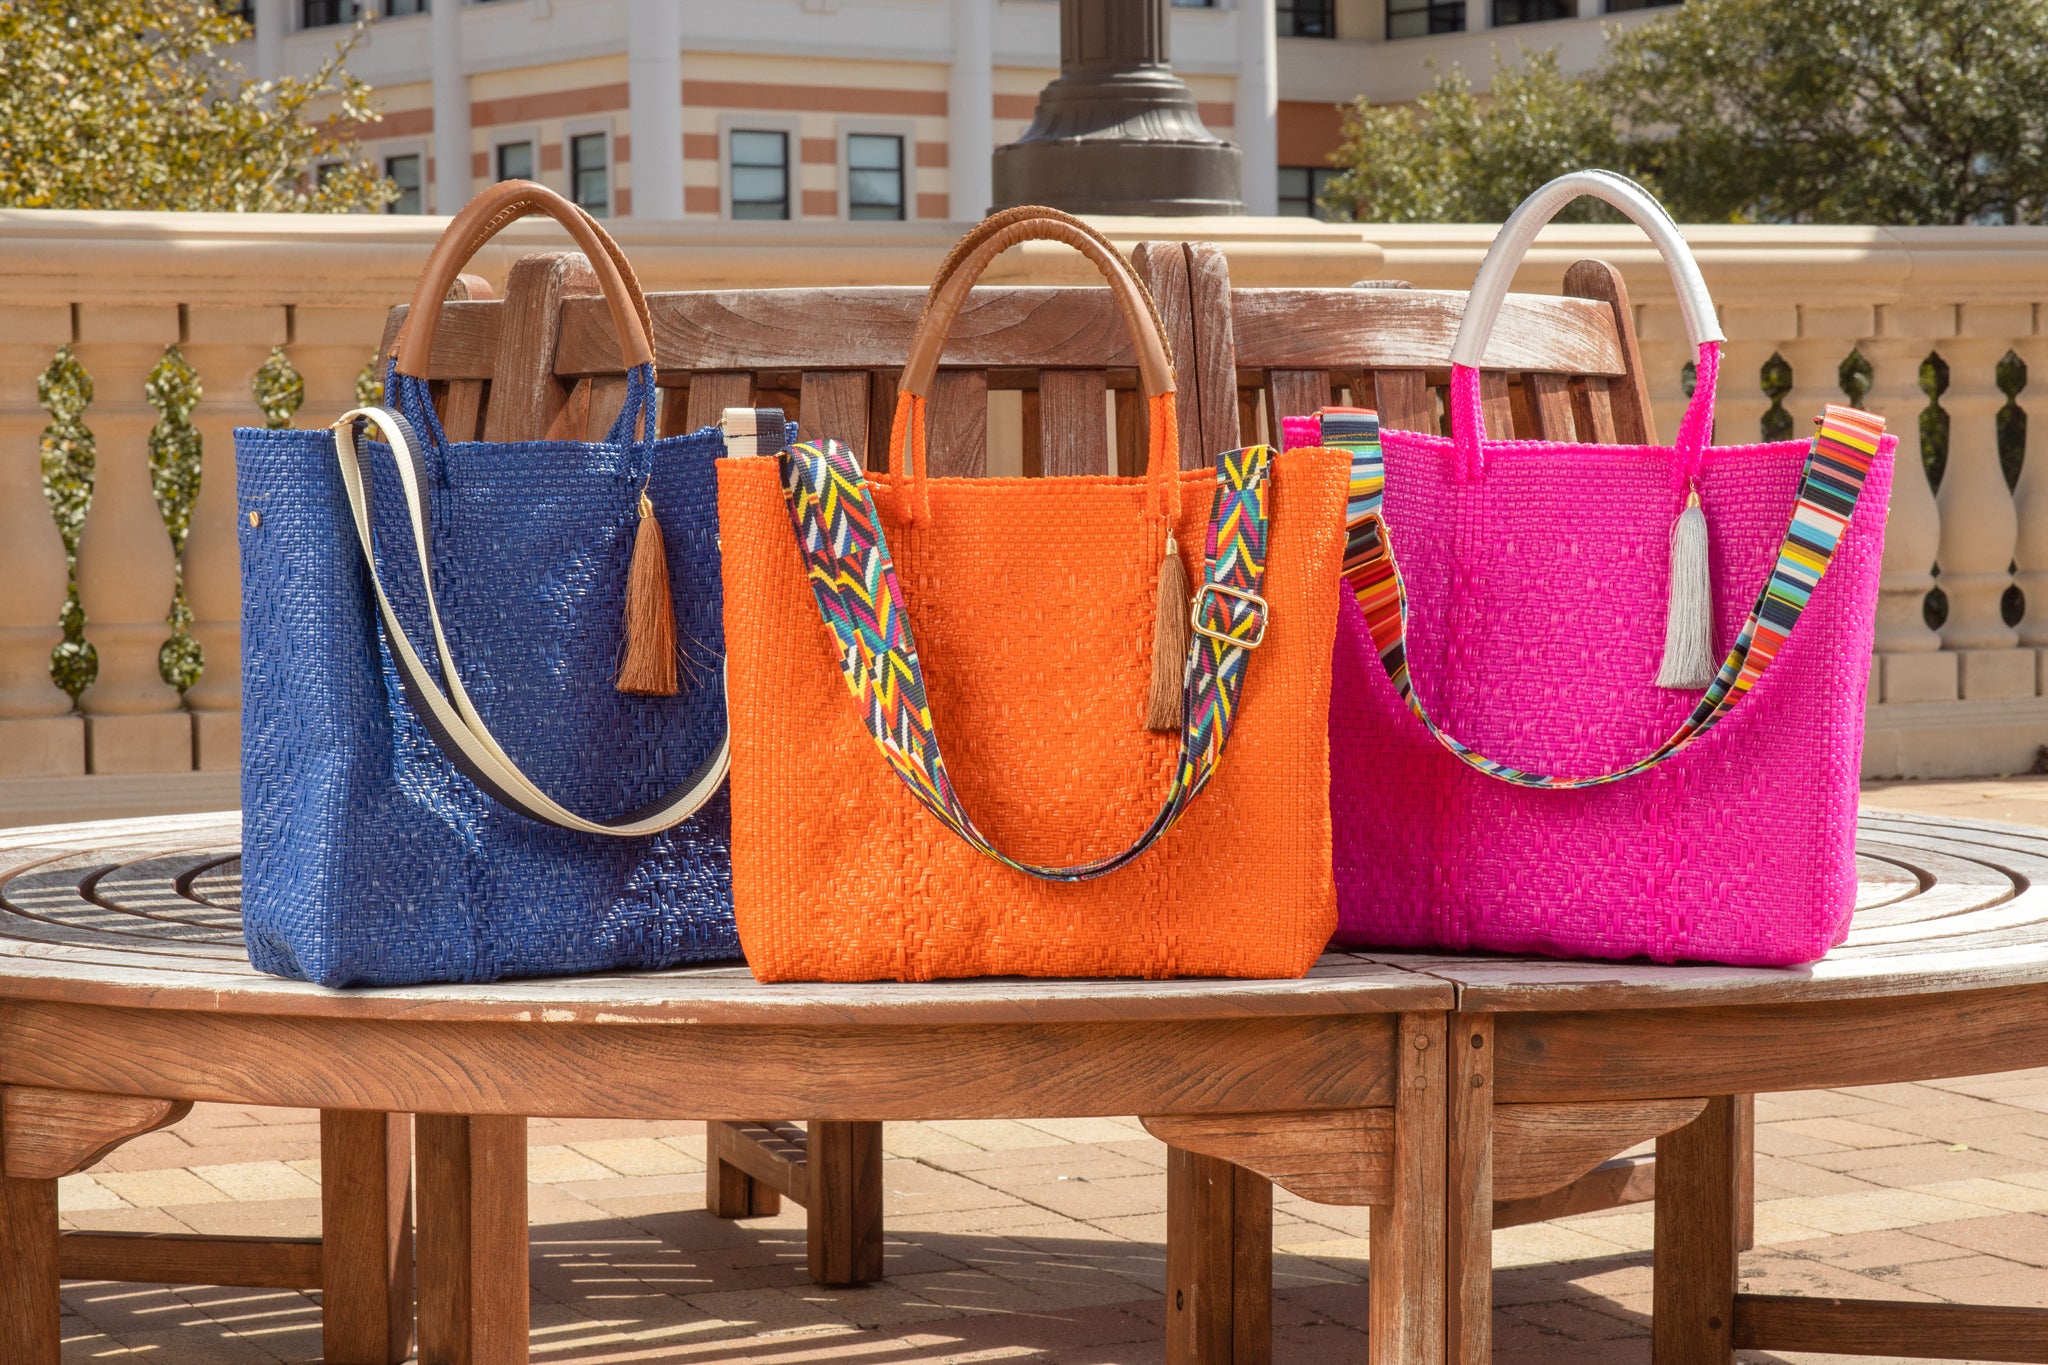 Navy blue, orange, and hot pink handbags with colorful straps on park bench